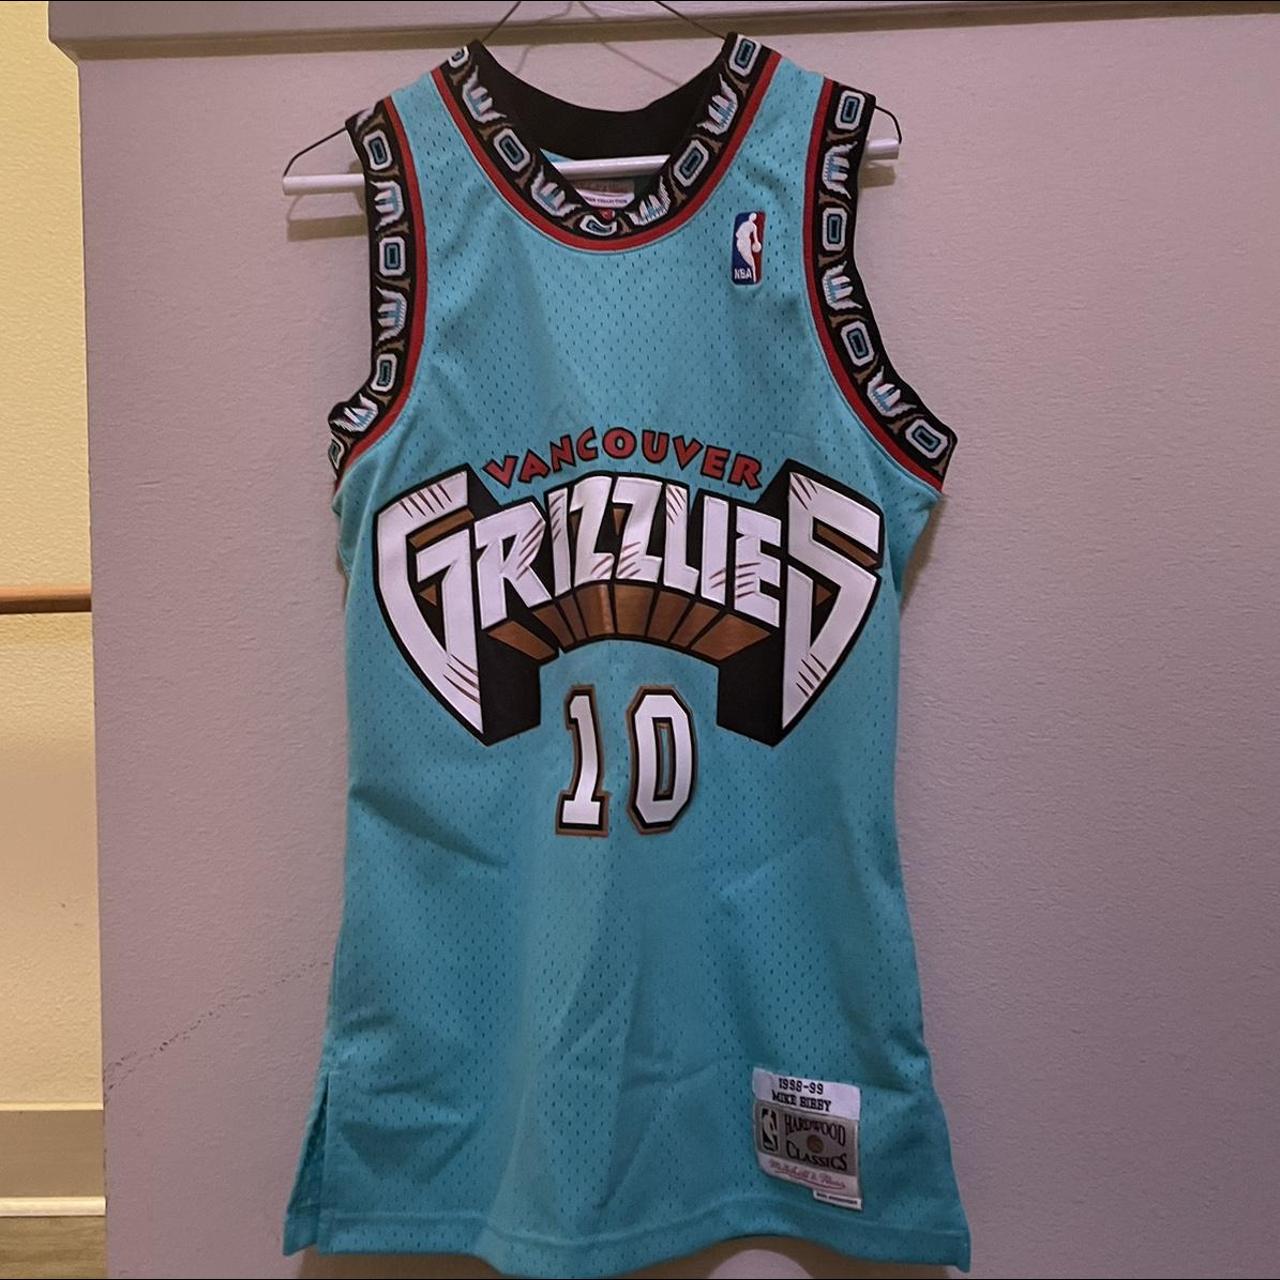 Mike Bibby Mitchell and Ness NBA Vancouver Grizzlies - Depop